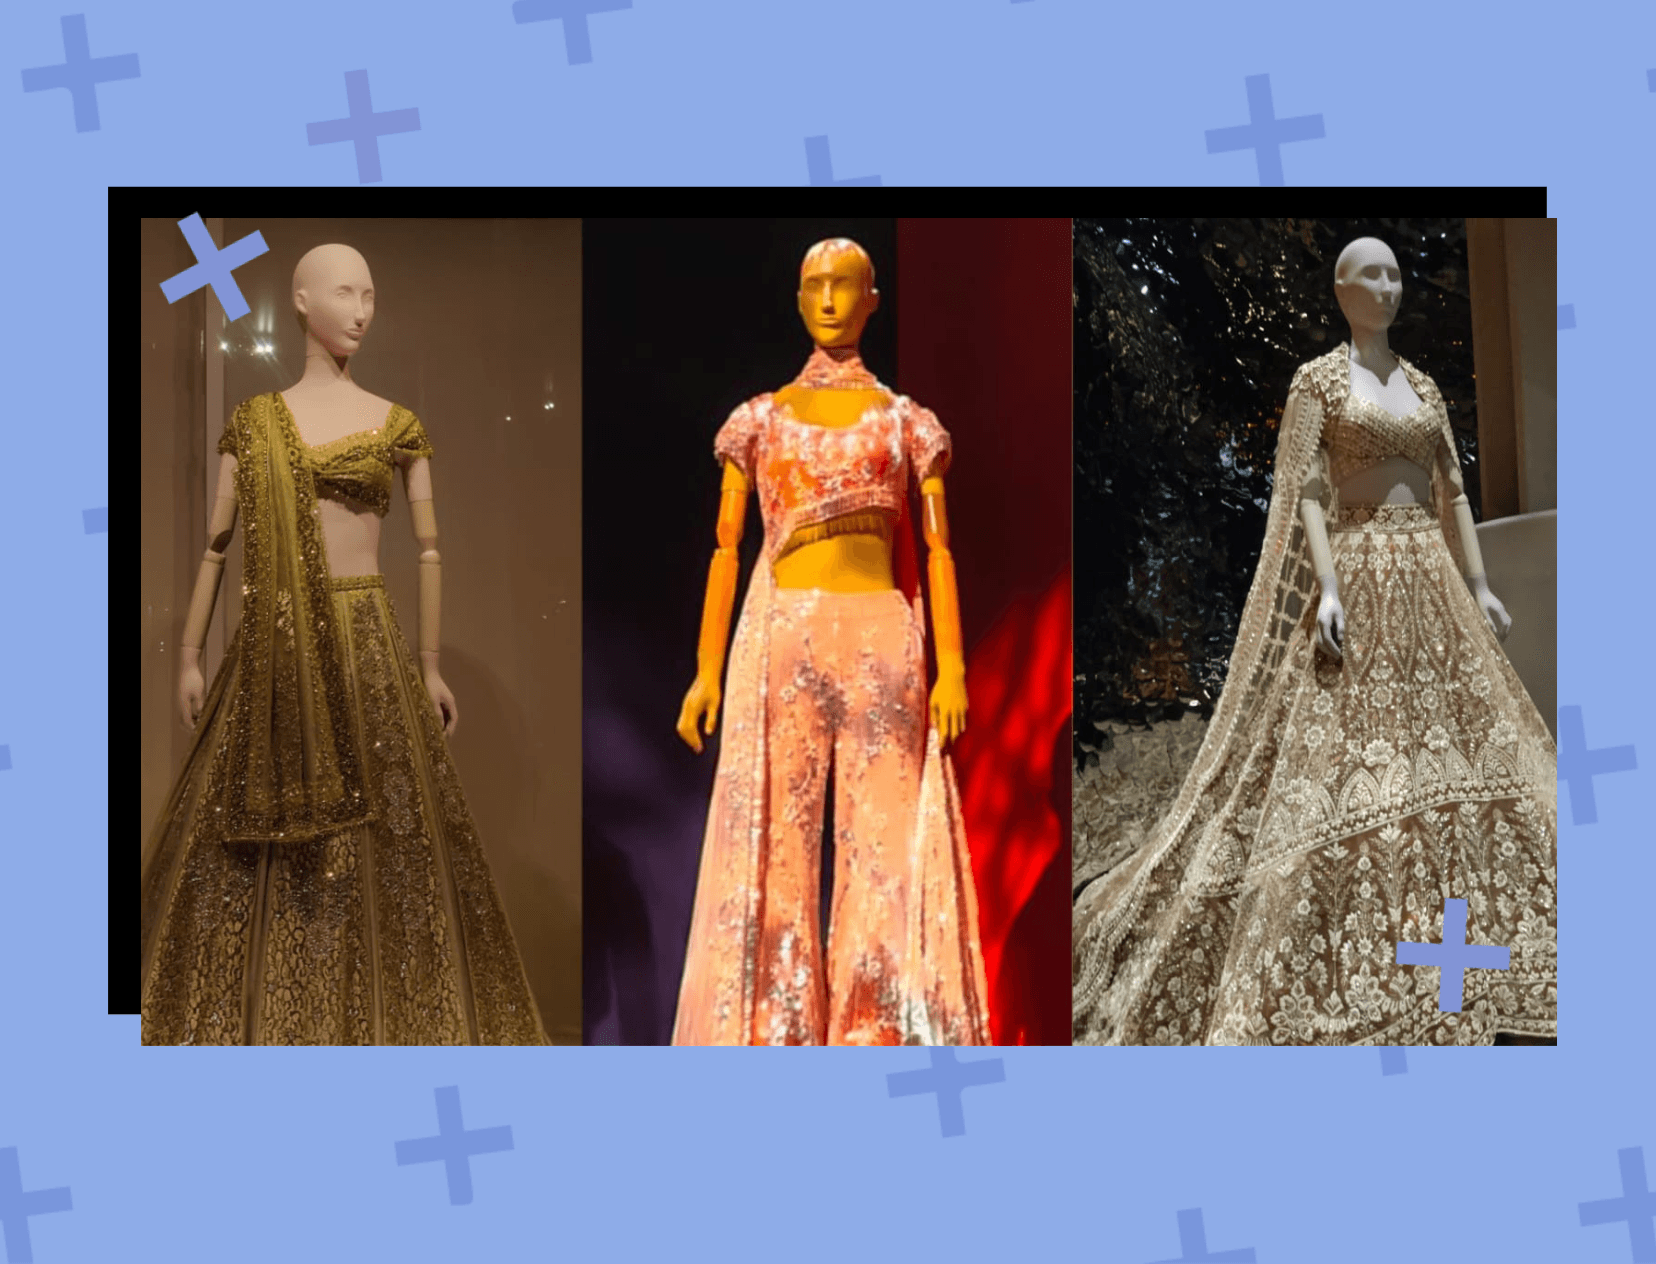 The Most Famous Outfits At The NMACC Fashion Exhibit!